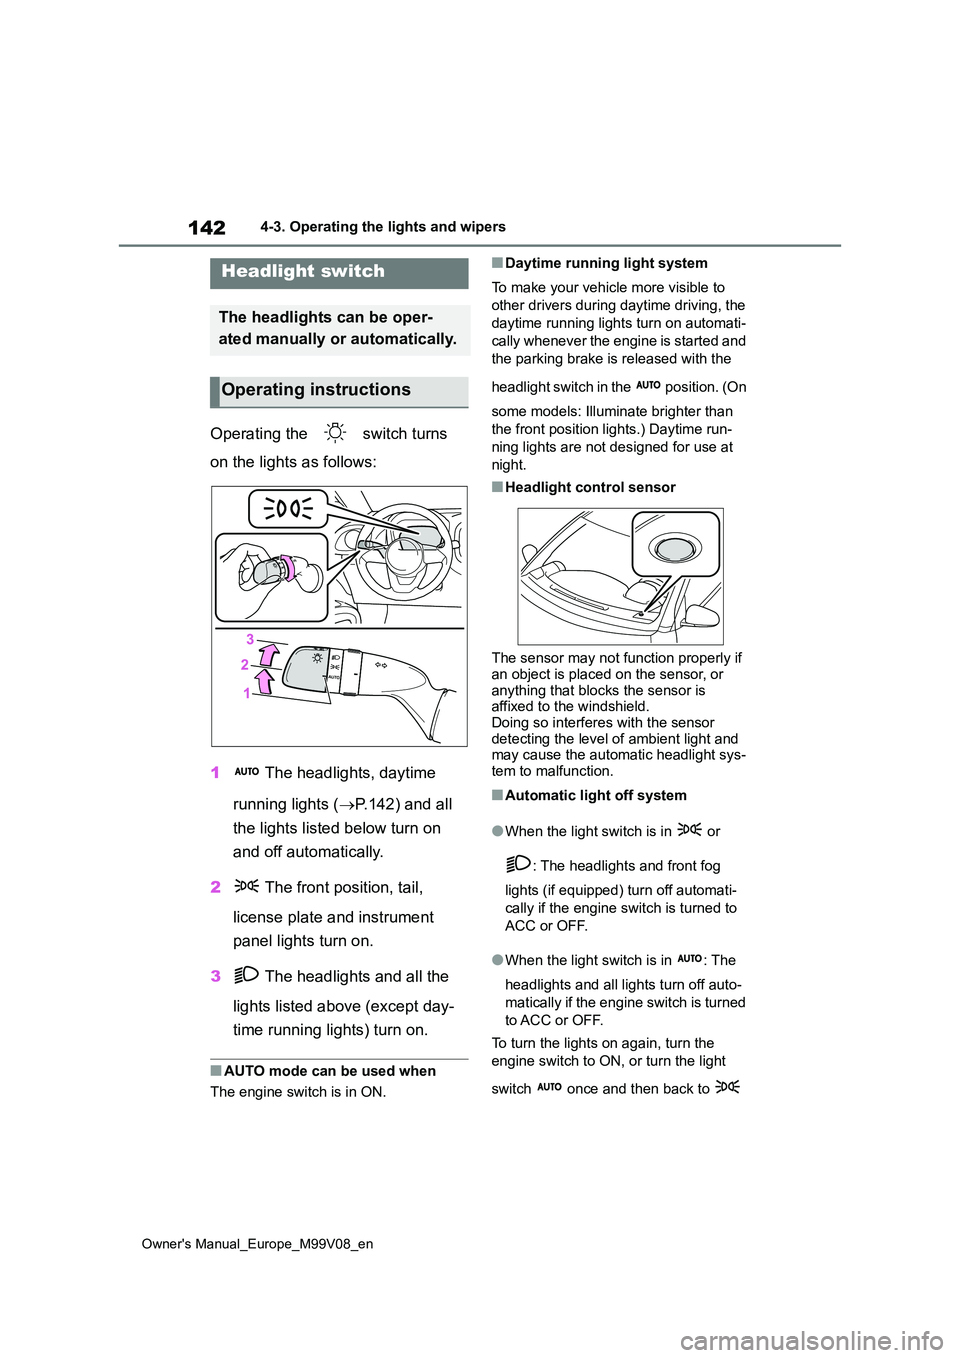 TOYOTA AYGO X 2022   (in English) Service Manual 142
Owner's Manual_Europe_M99V08_en
4-3. Operating the lights and wipers
4-3.Operating the lights and wipers
Operating the   switch turns  
on the lights as follows: 
1  The headlights, daytime  
